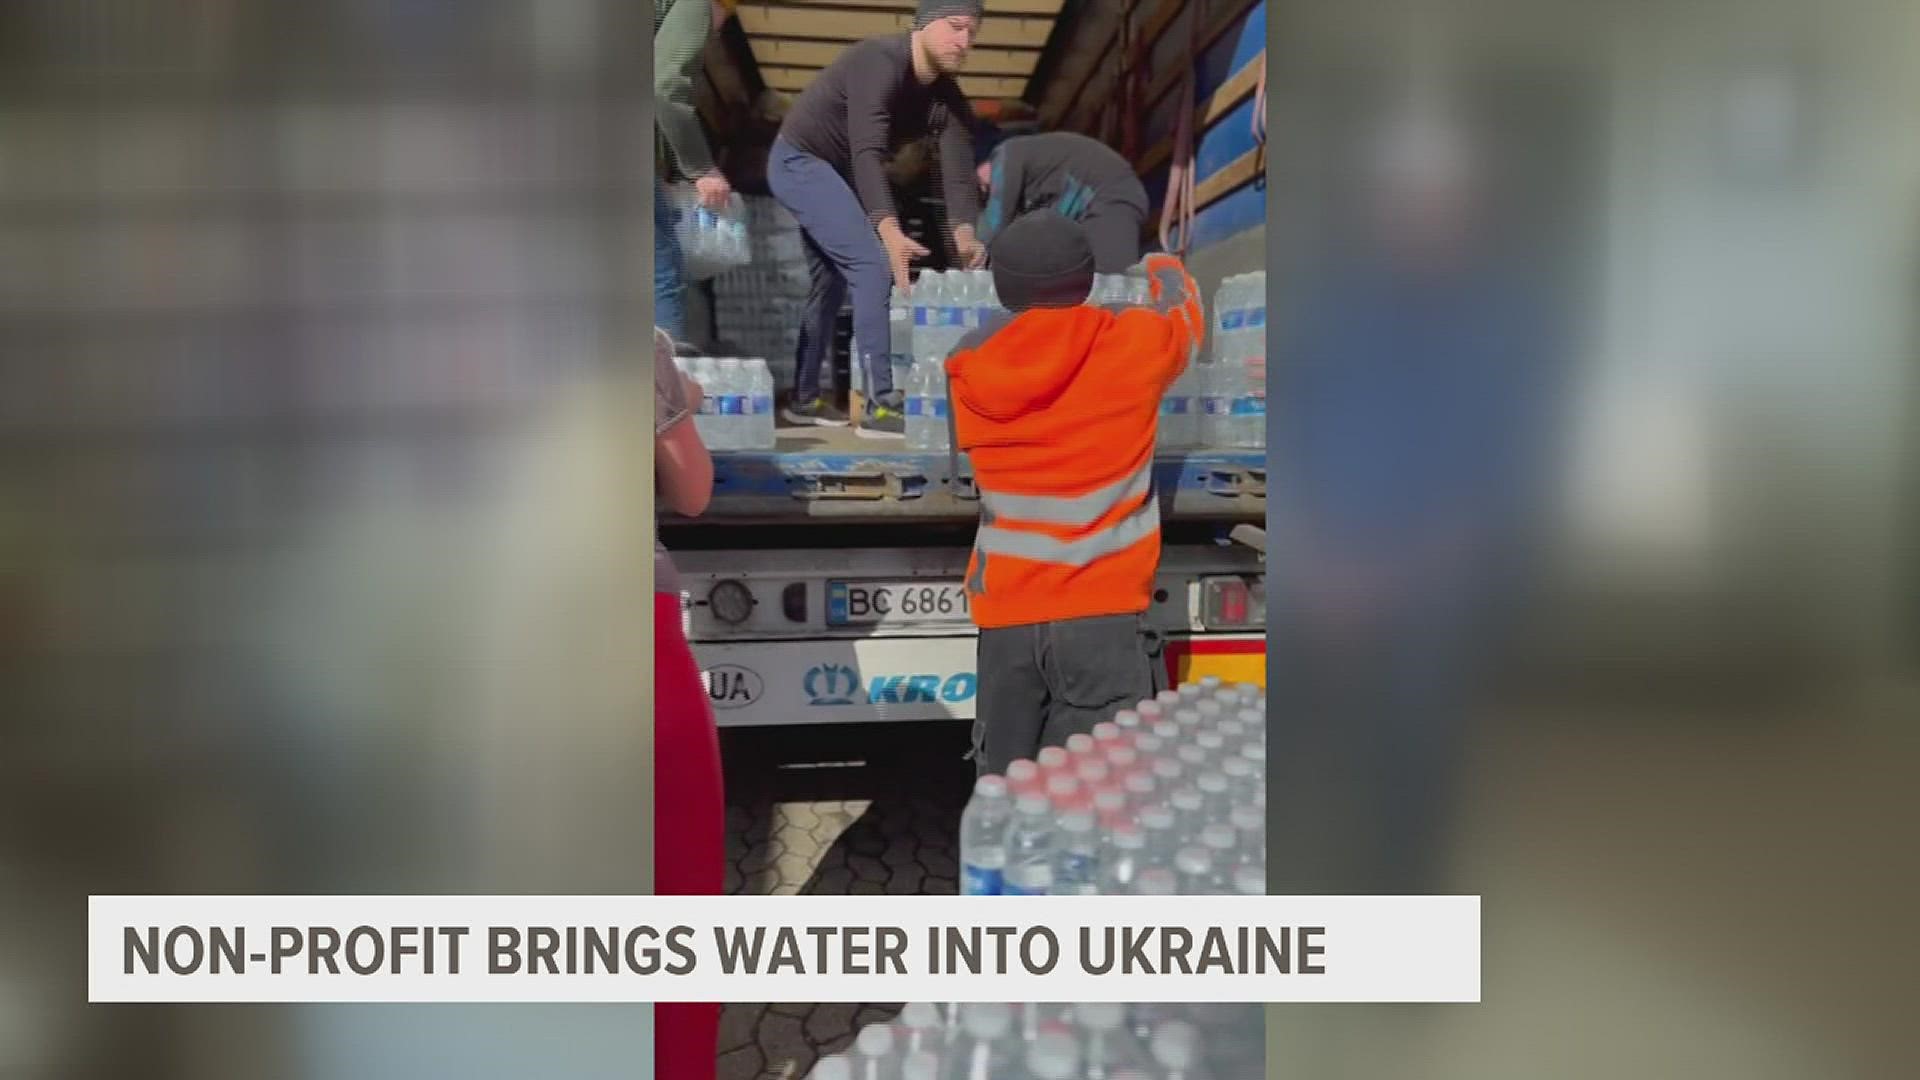 Mercy Waters aids disaster sites with fresh drinking water. Now, one member is coordinating driving water into Ukraine by the truckload.